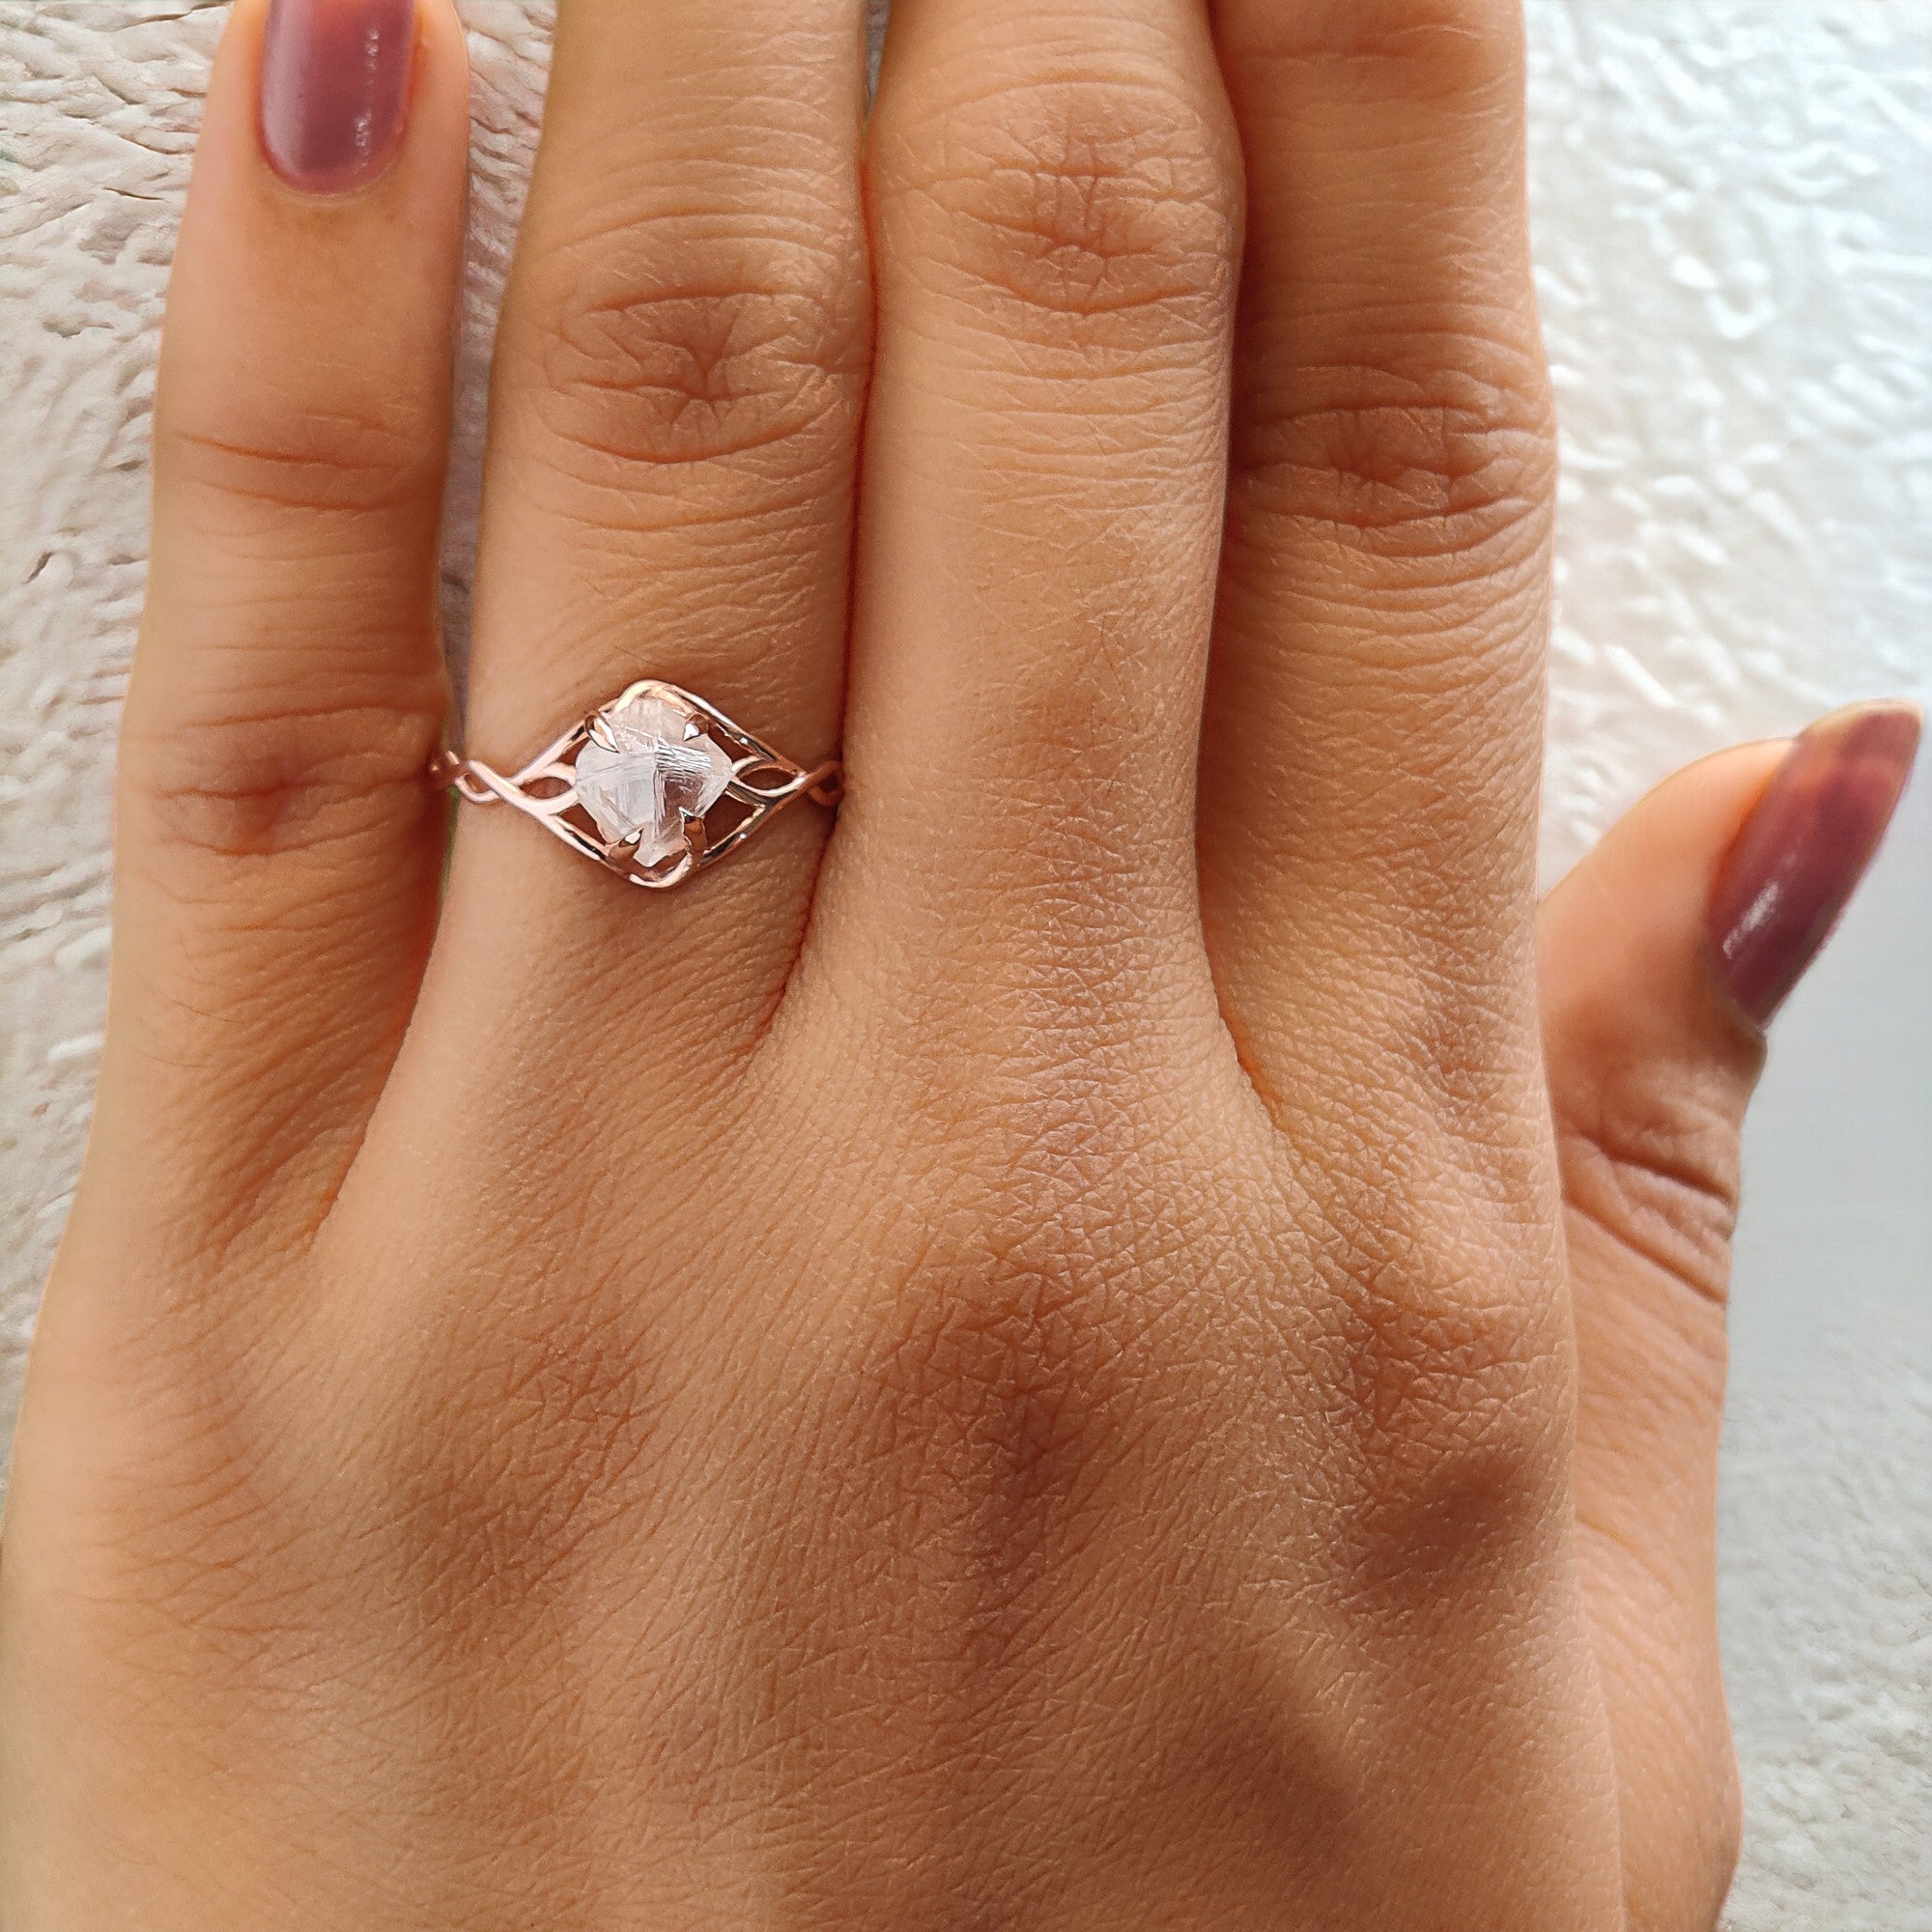 Rough White-F Color Diamond Ring 1.23 Ct 6.48 MM Crystal Rough Diamond Ring 14K Solid Rose Gold Silver Engagement Ring Gift For Her KDL2486